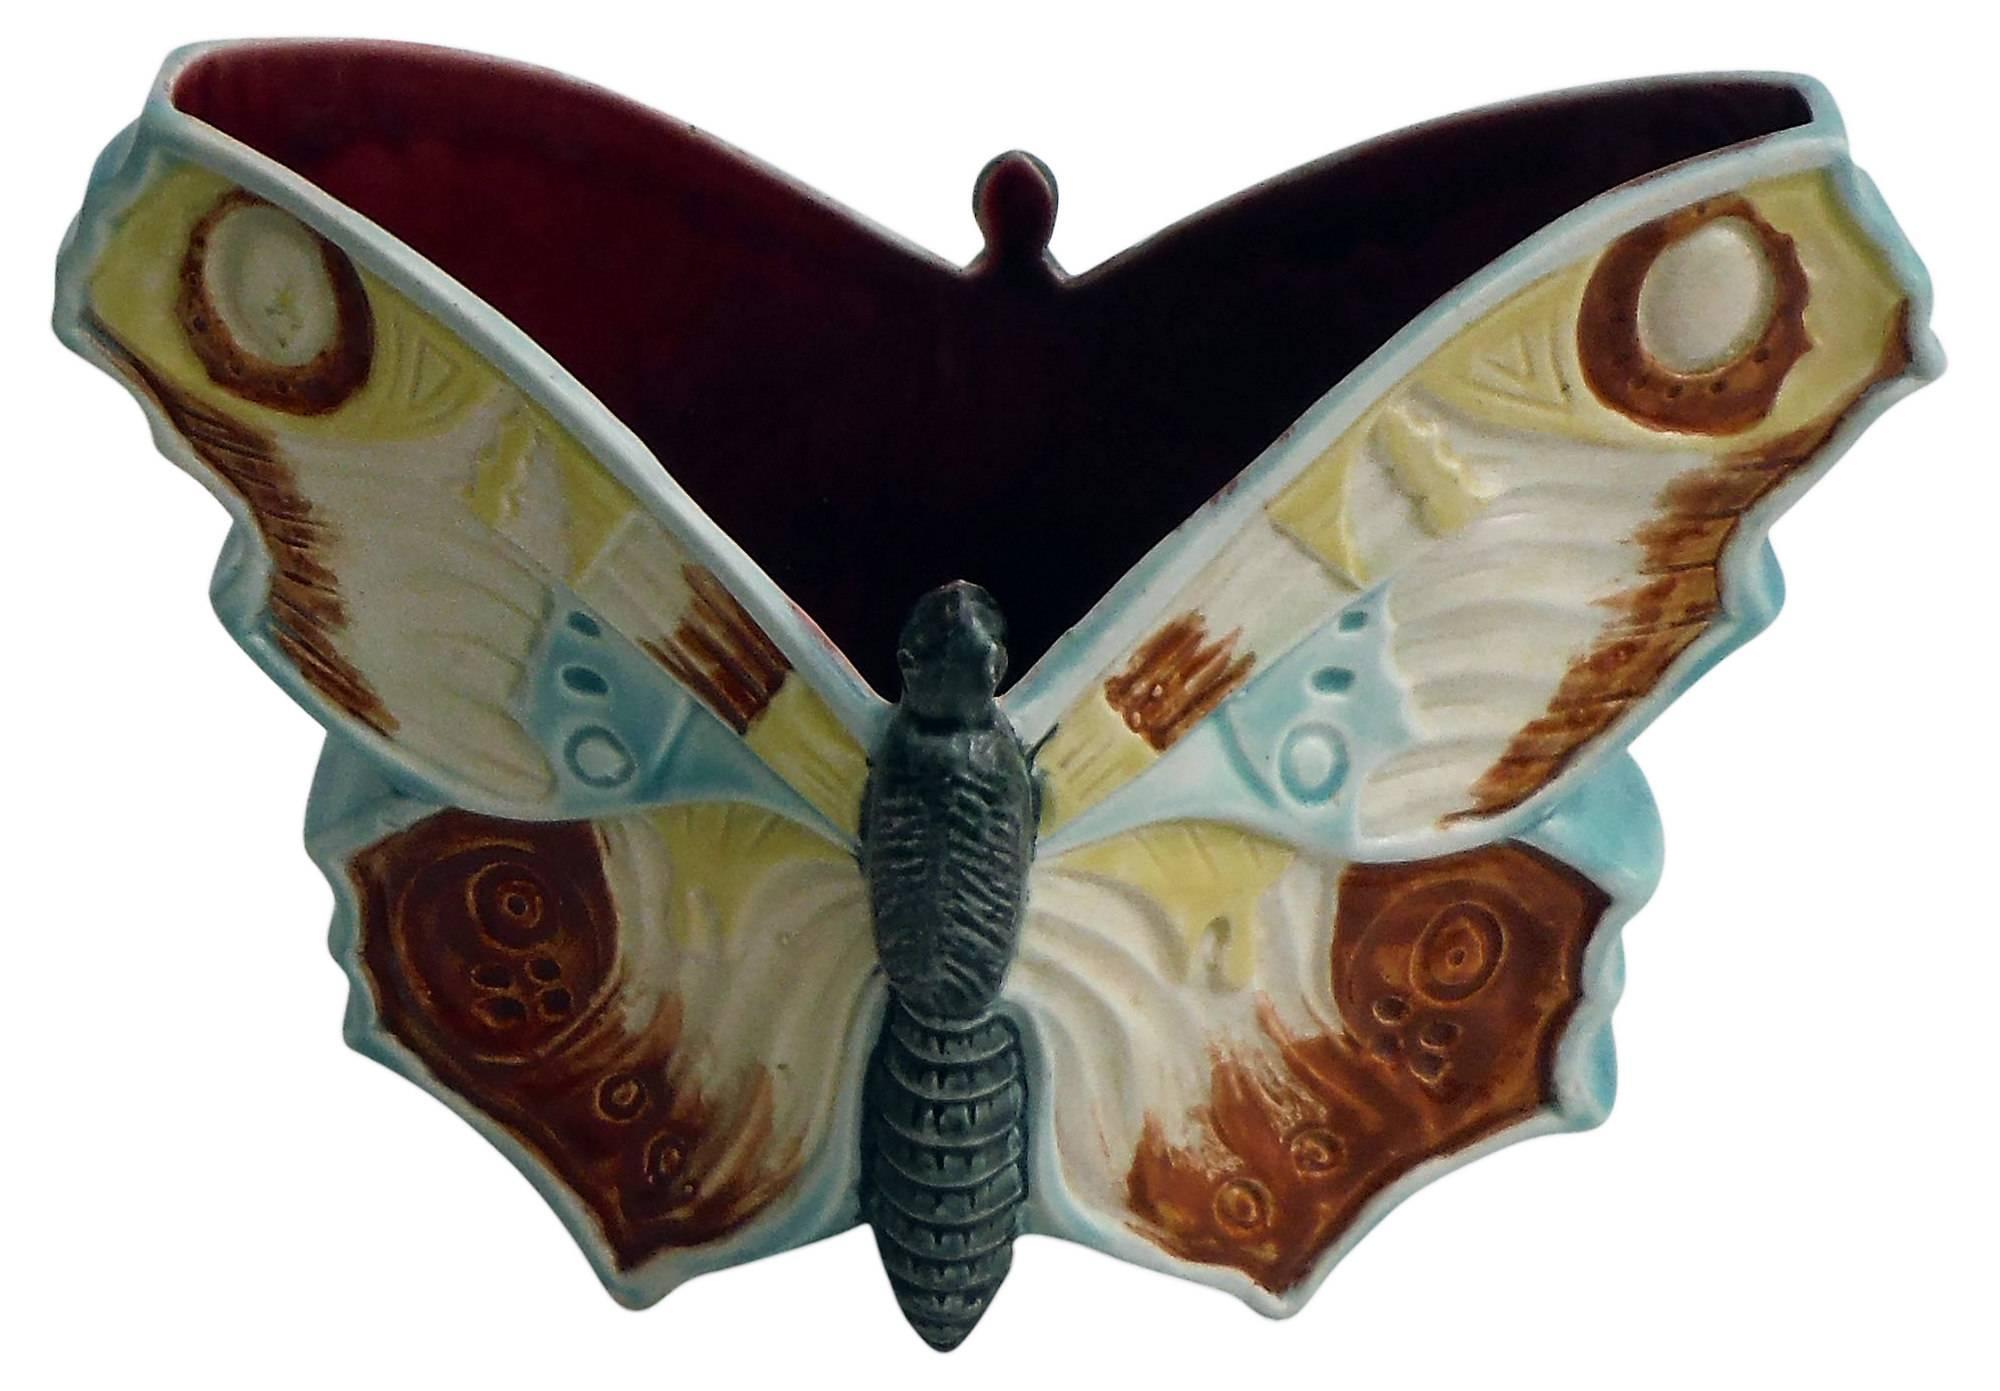 Unusual Majolica butterfly jardiniere from North of France, possibly Orchies, circa 1890.
This Majolica is a typical of the Art Nouveau period with the naturalistic inspiration like butterfly, dragonfly.